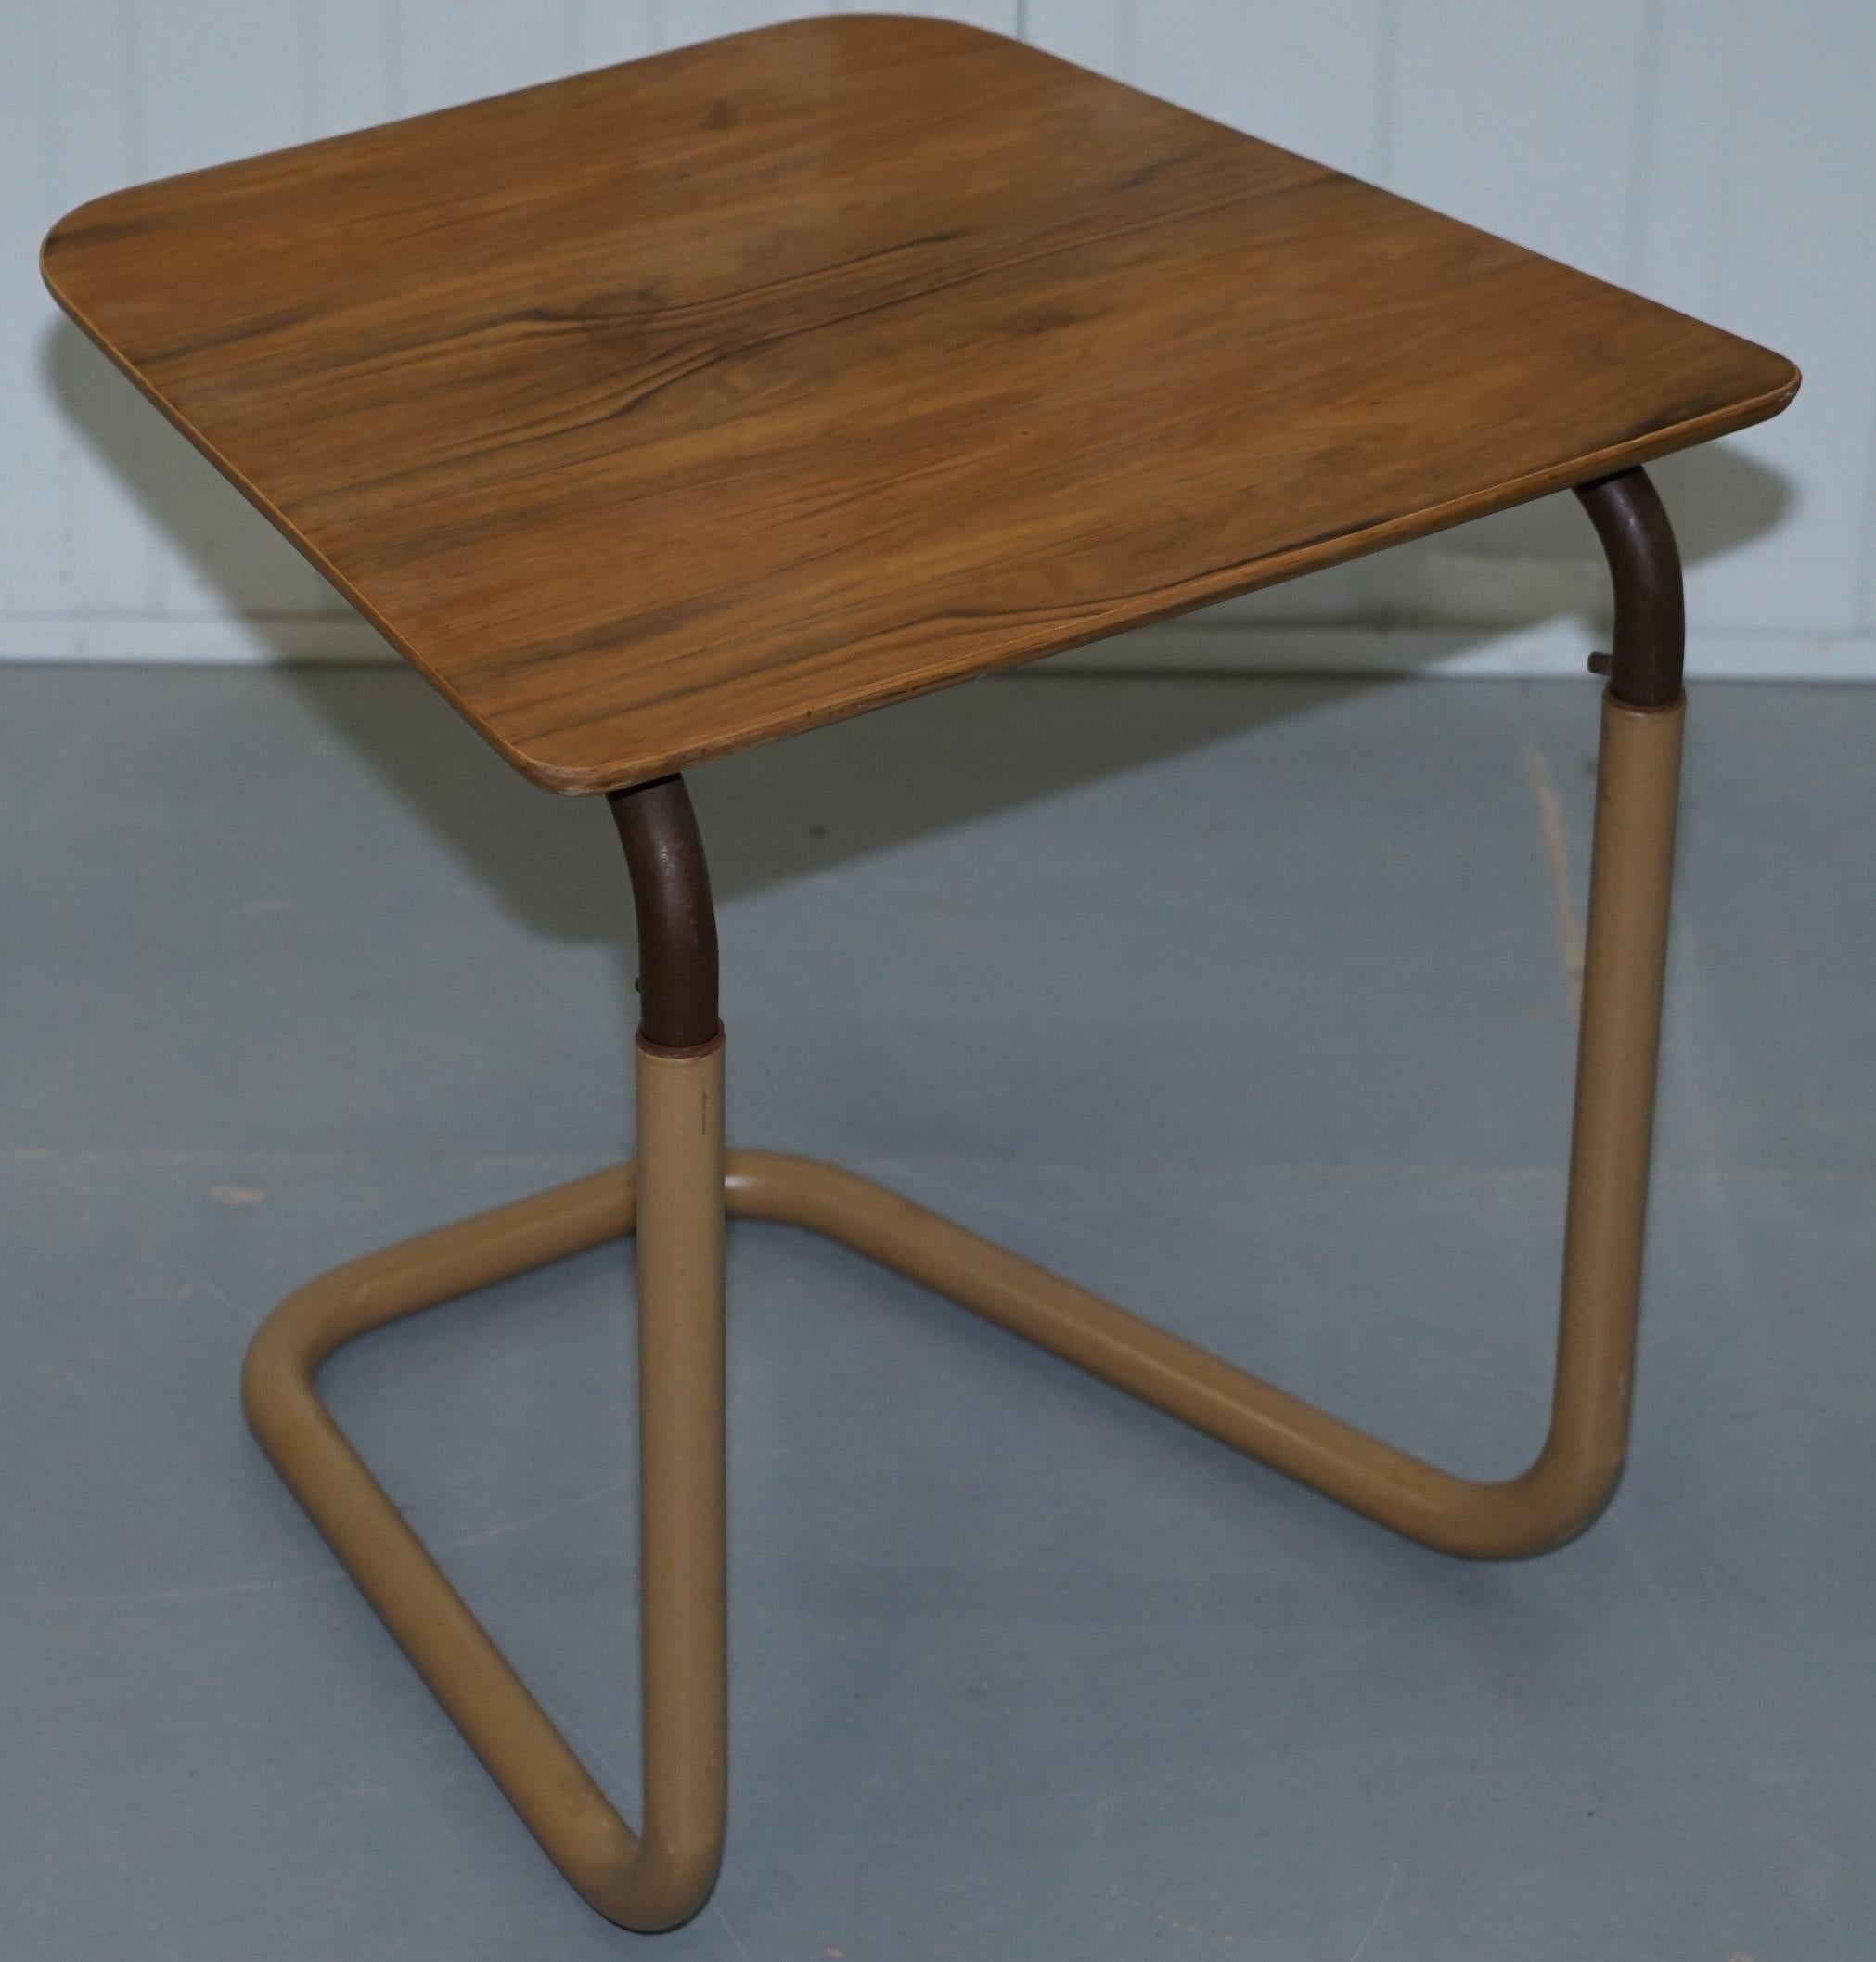 staples cantilever table